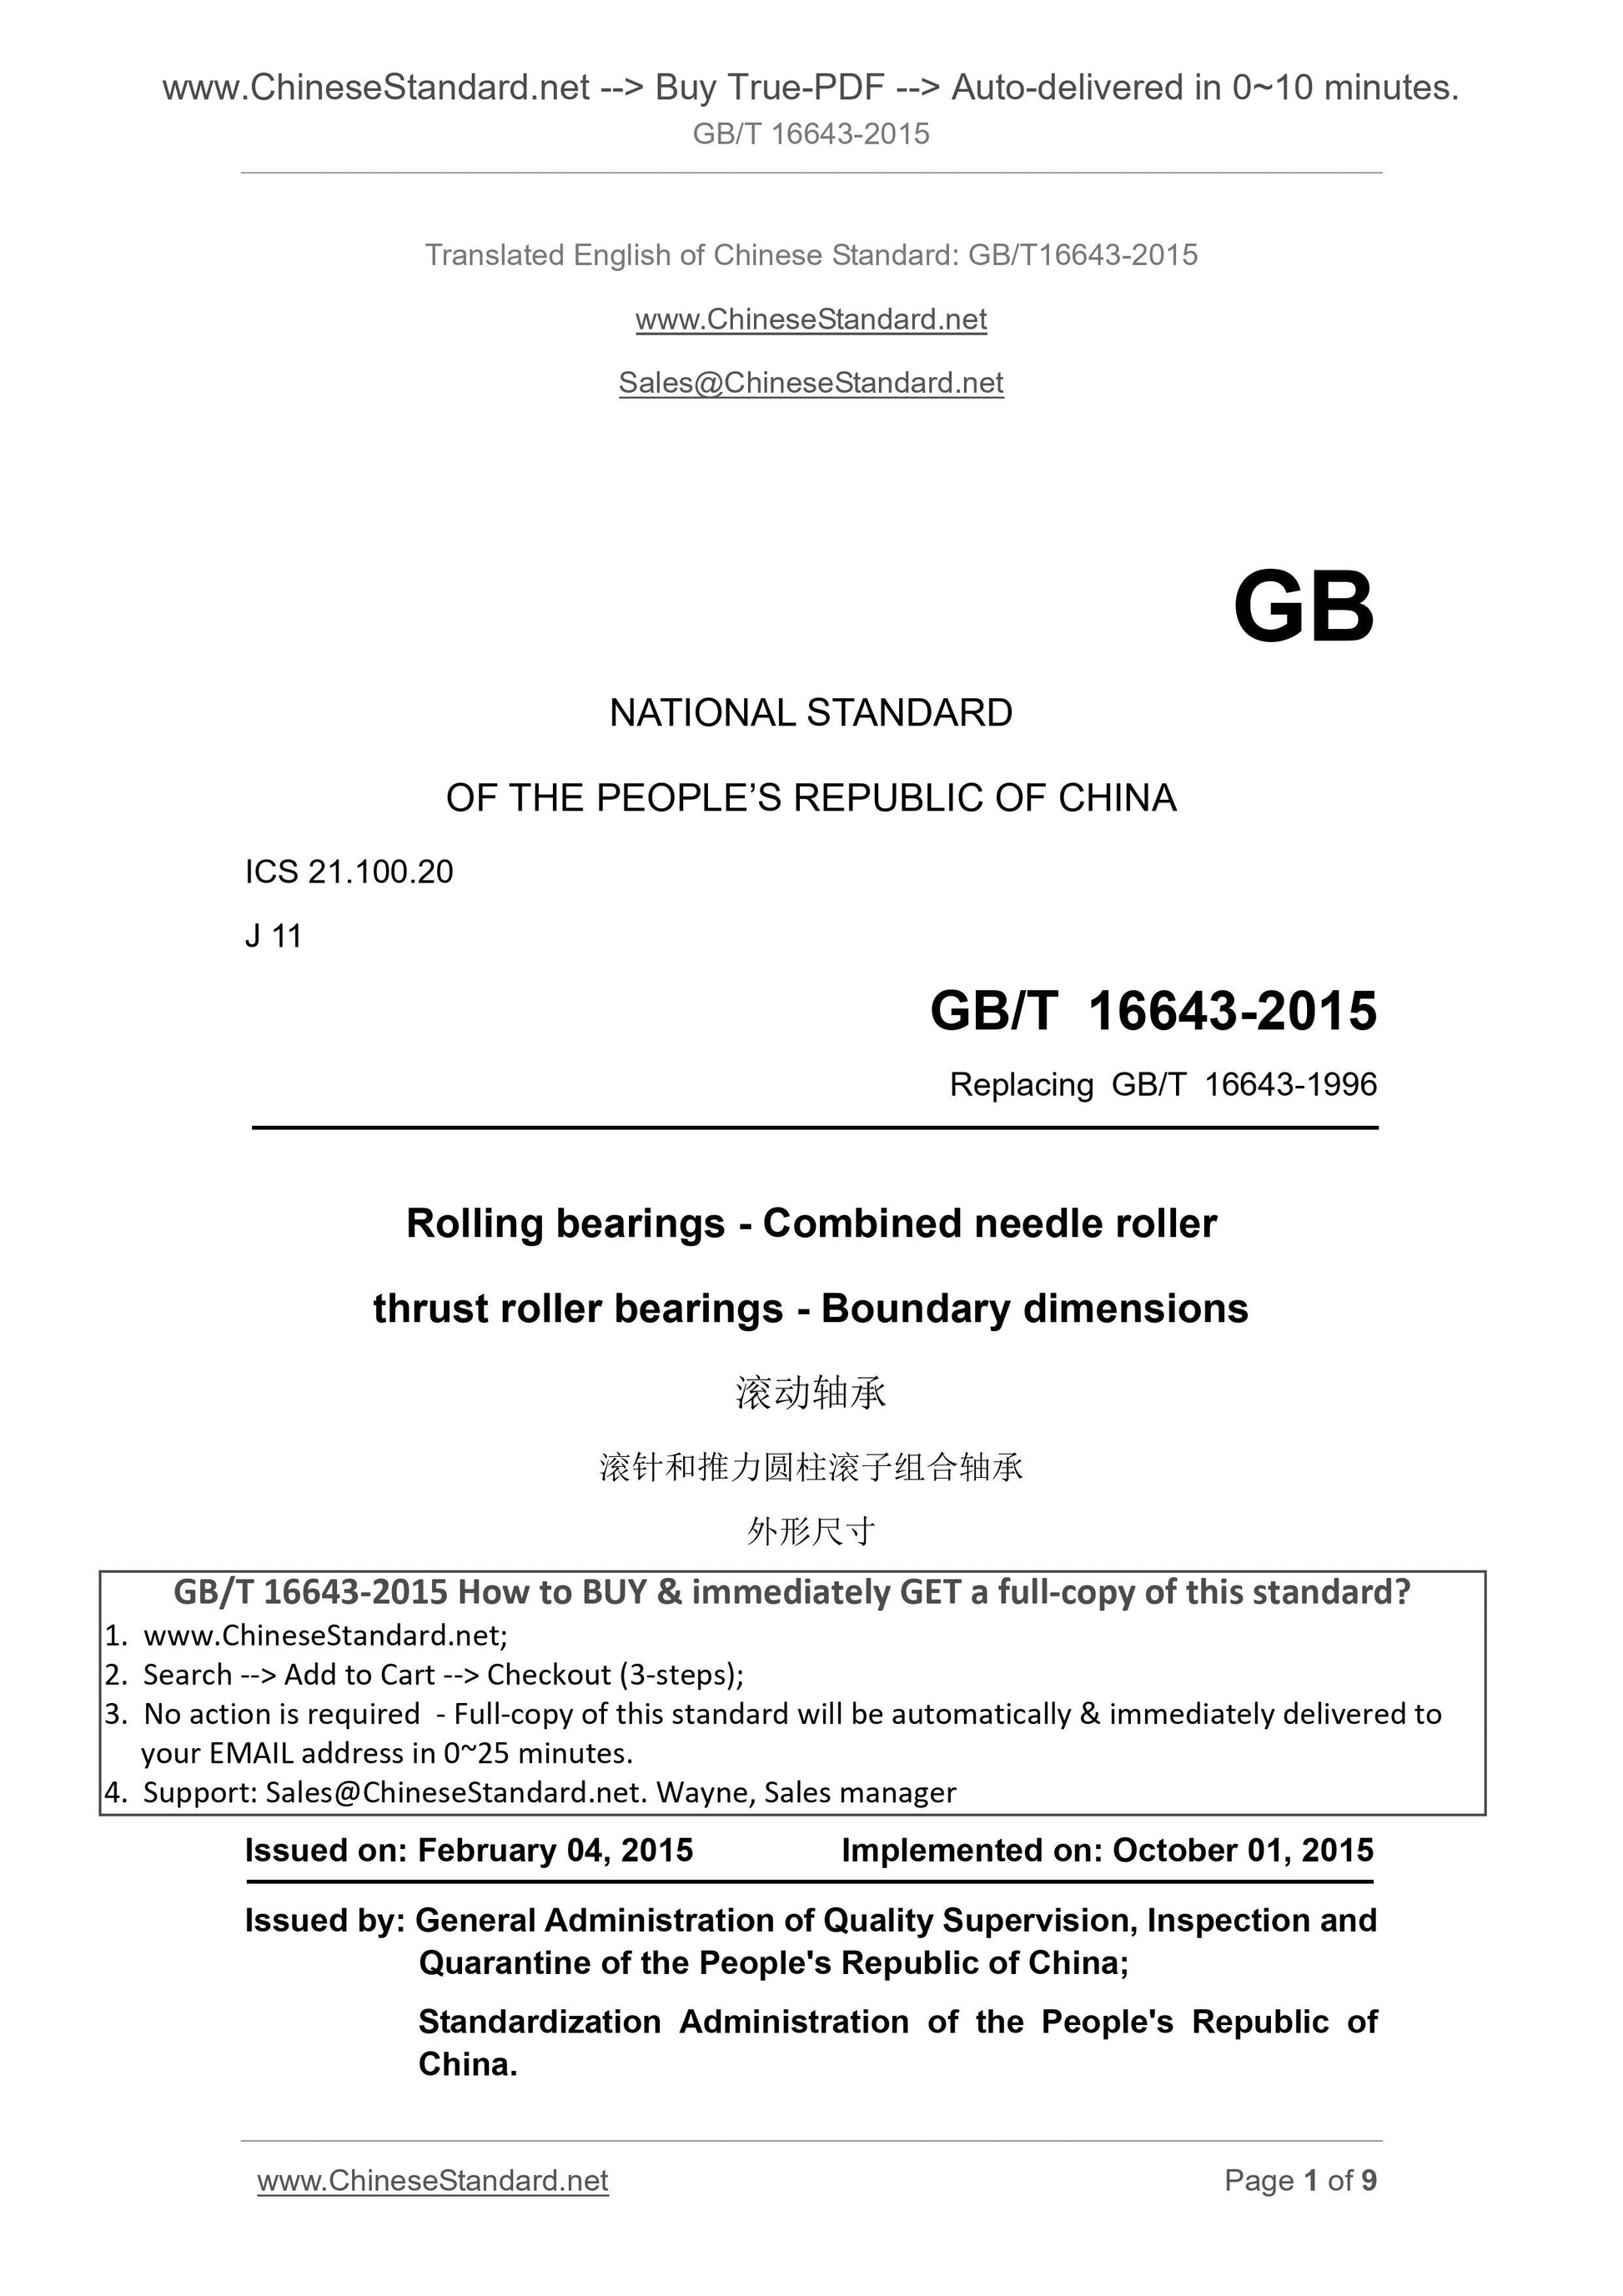 GB/T 16643-2015 Page 1